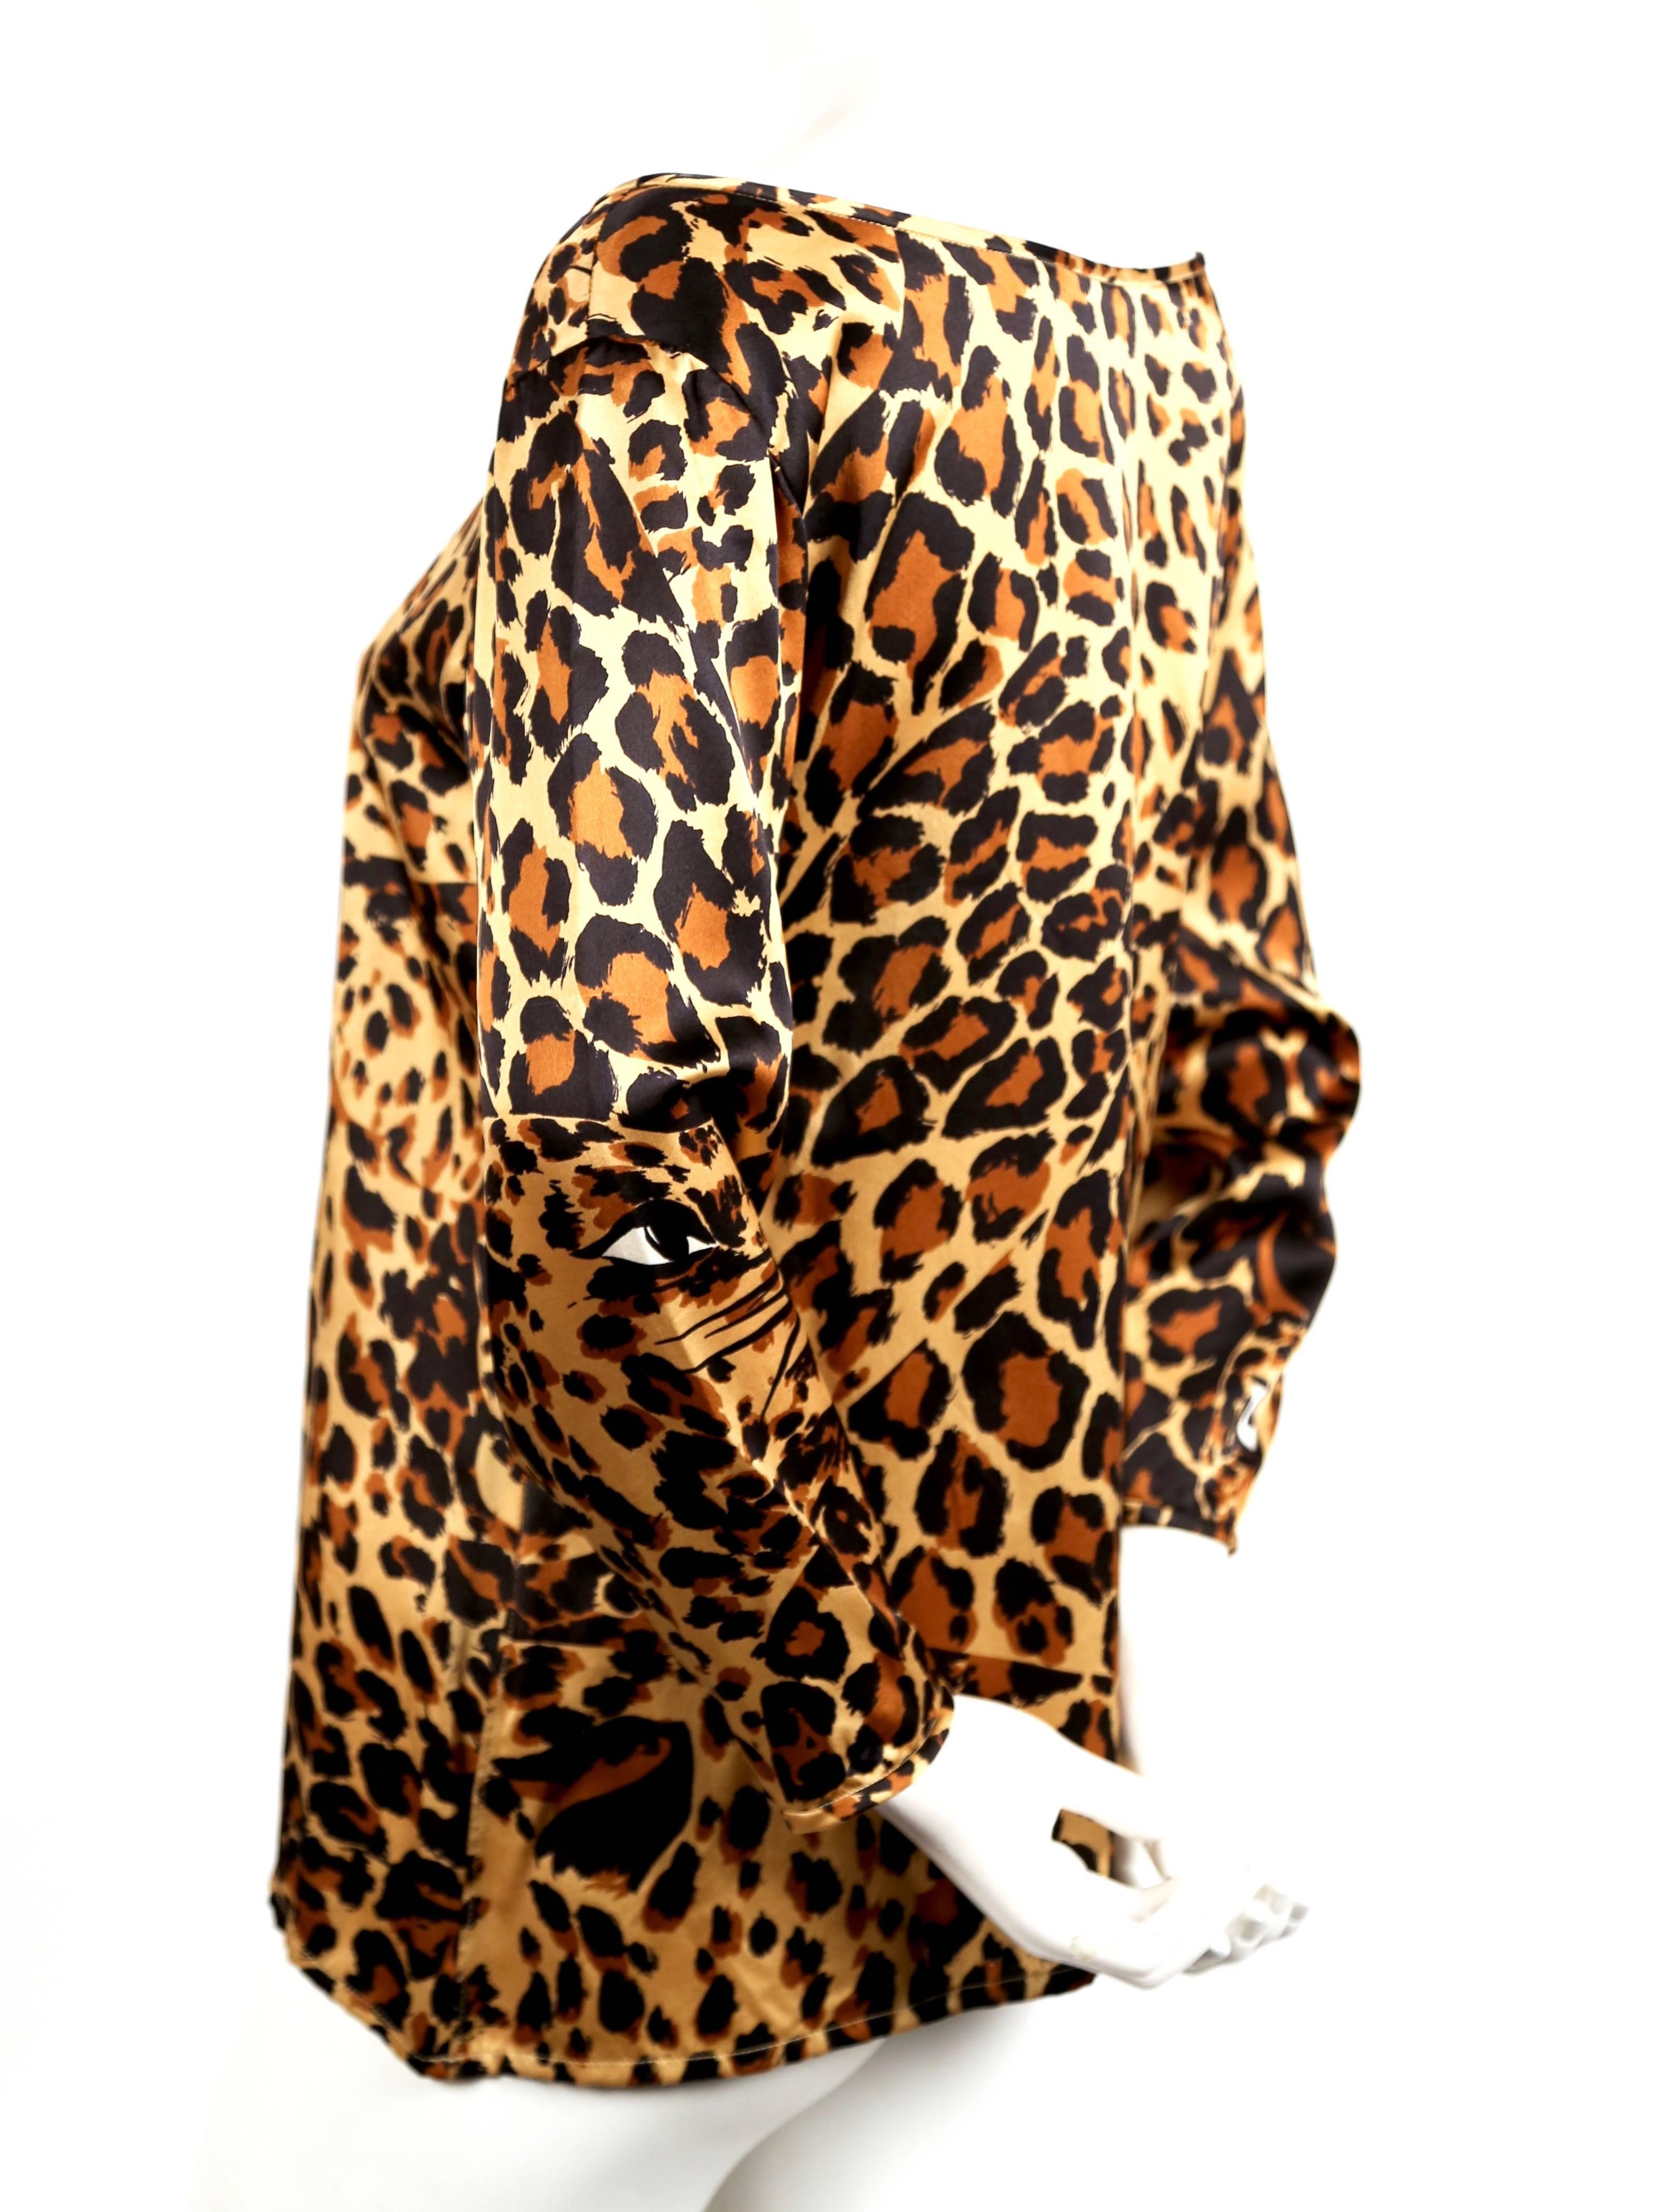 Leopard-printed, silk top with boat neckline from Yves Saint Laurent dating to Fall 1986 as seen on the runway. Labeled a French size 38. Approximate measurements: shoulders 18